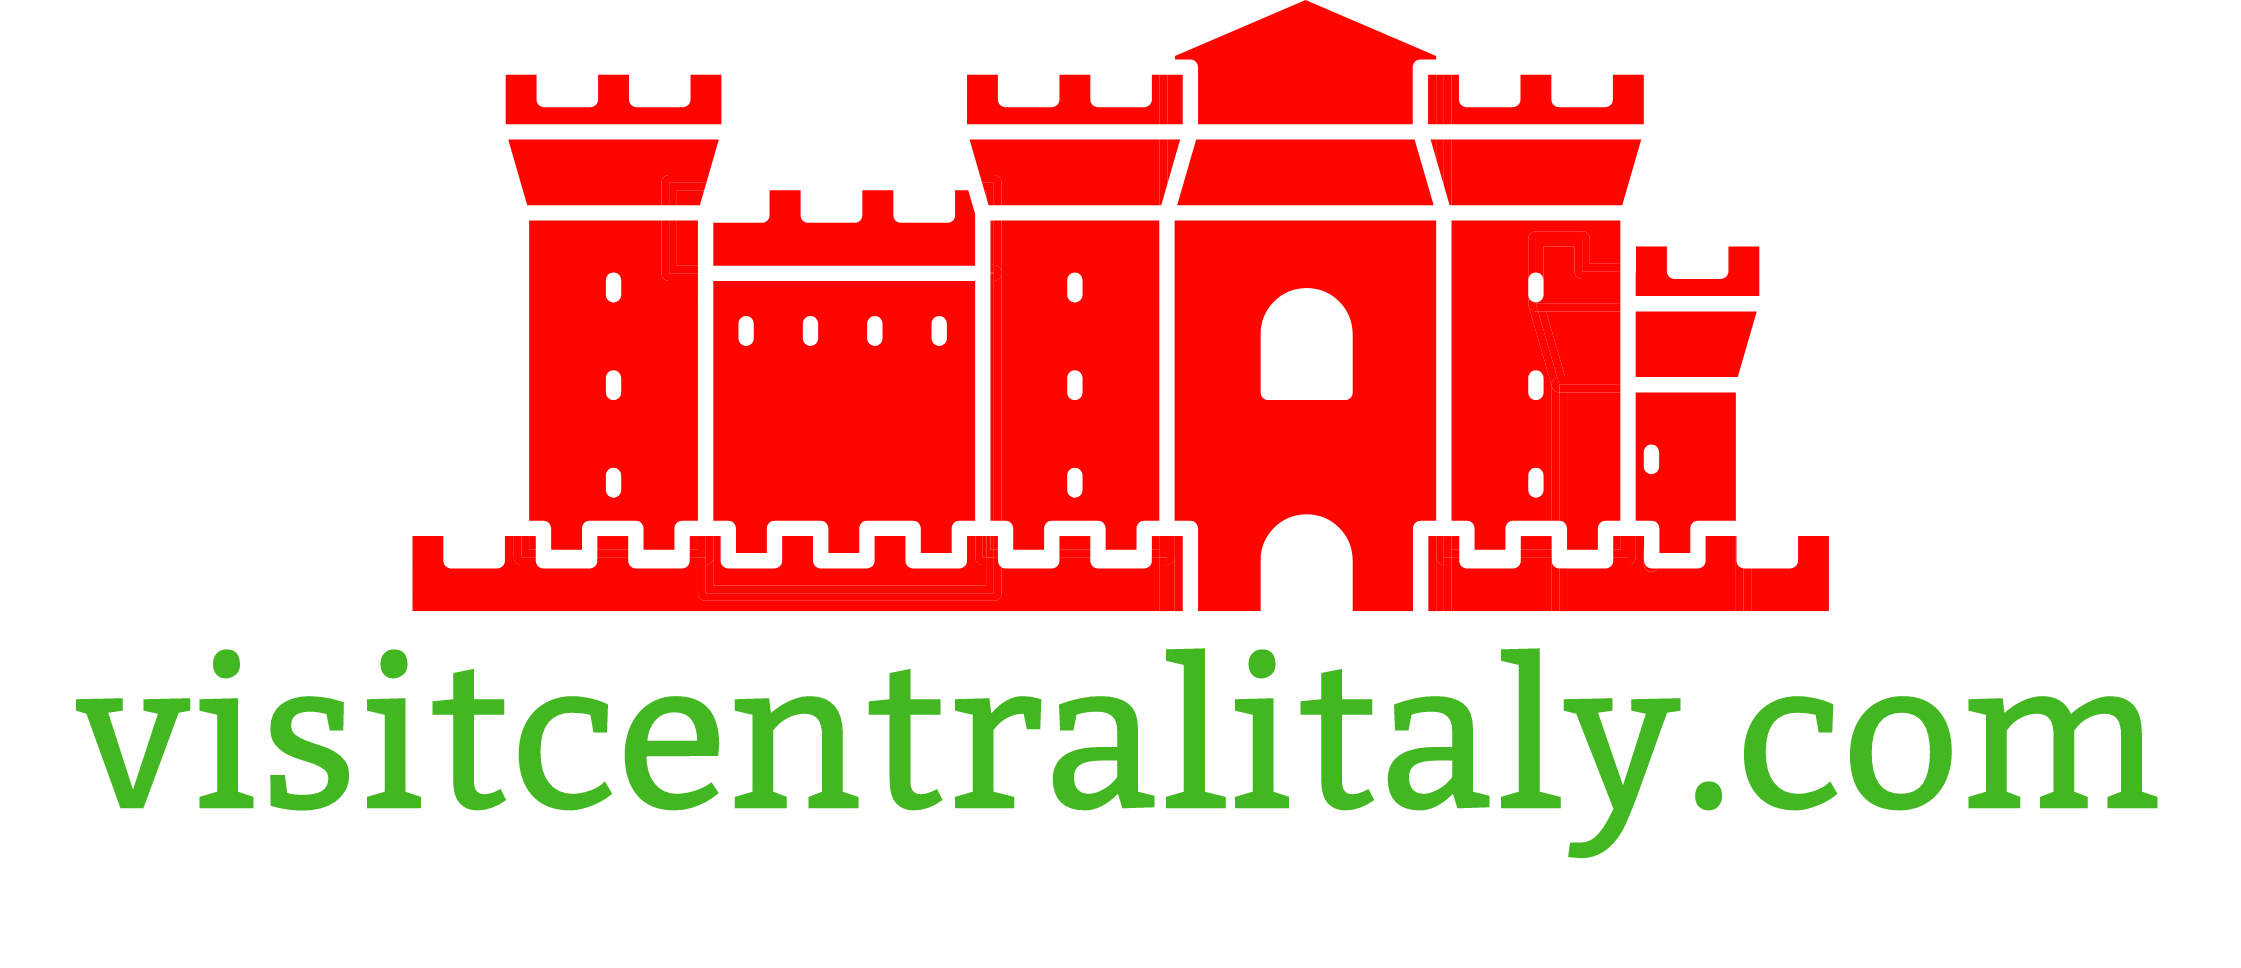 VisitCentralItaly.com Provides Opportunity To Win A House In Central Italy 